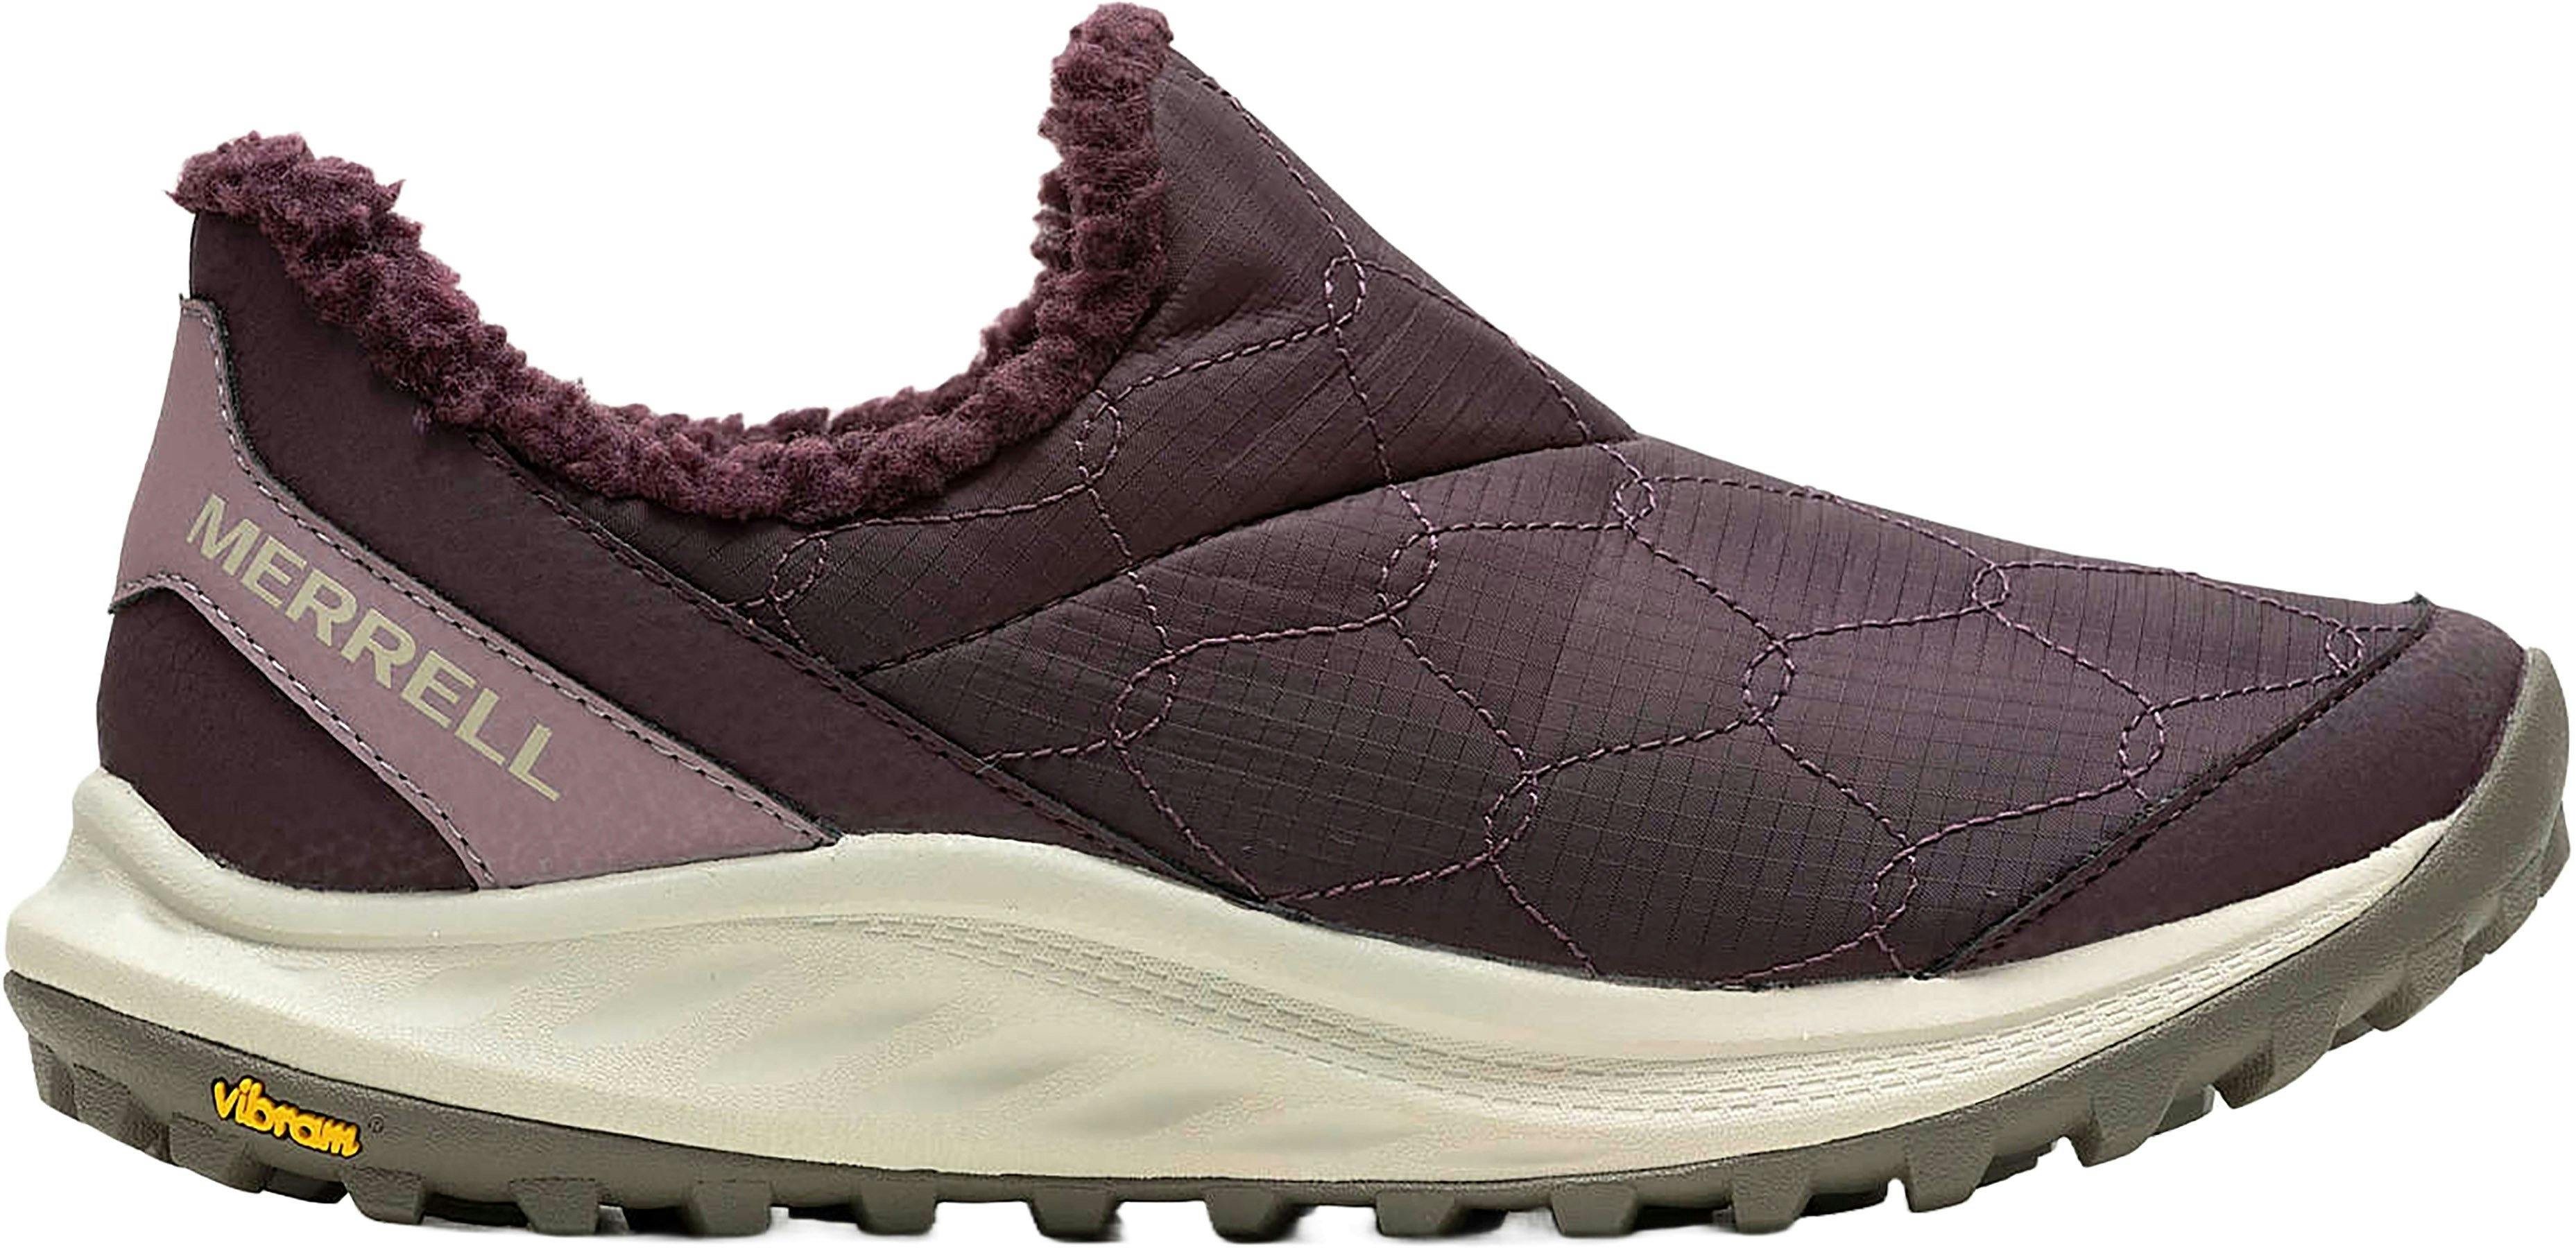 Product image for Antora 3 Thermo Moc Shoes - Women's